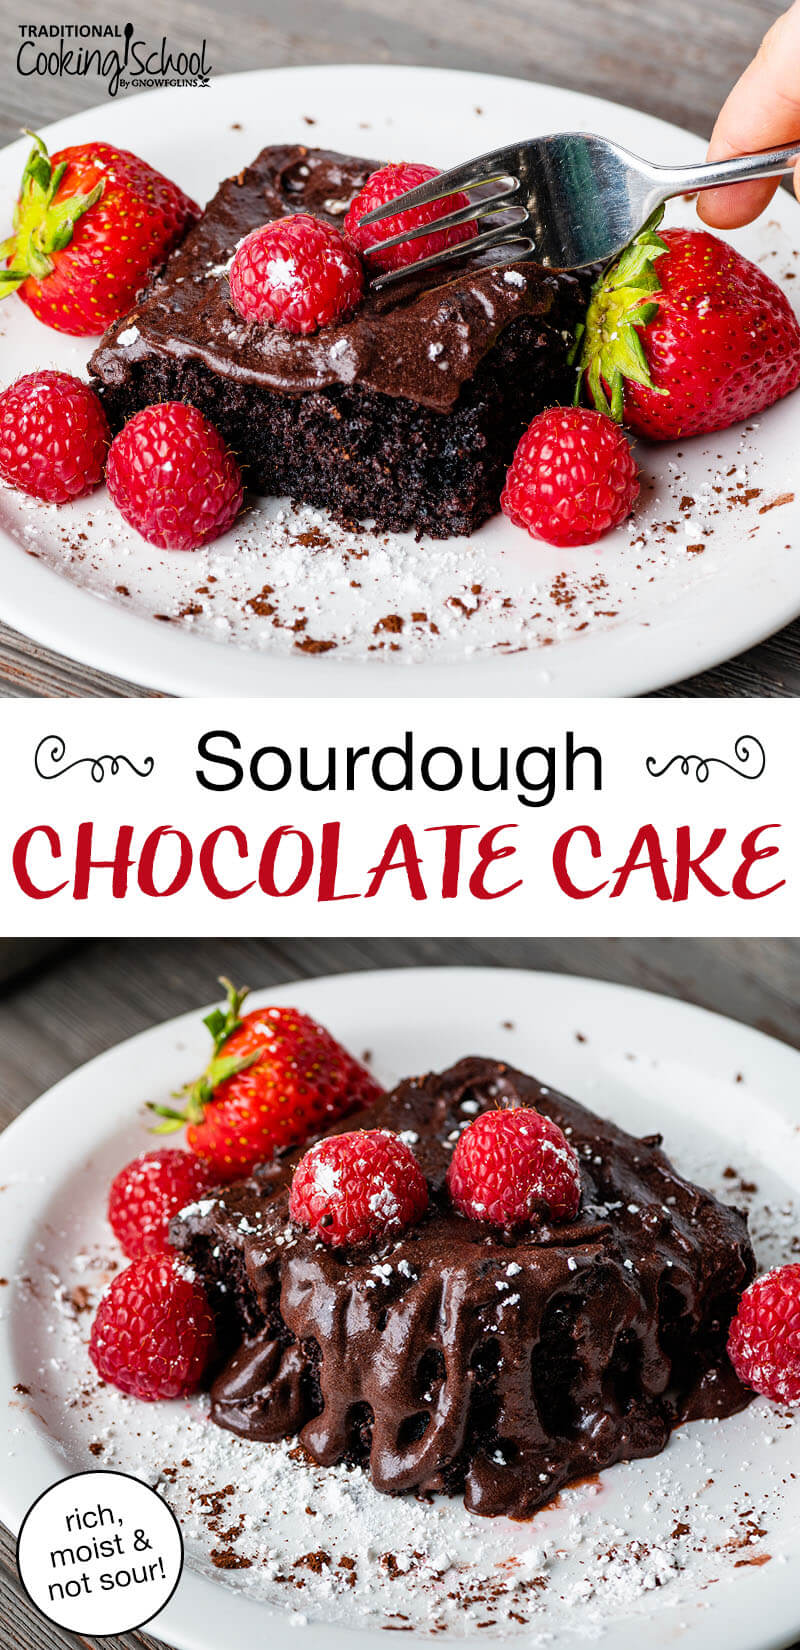 photo collage of a white plate with a piece of chocolate frosted chocolate cake topped with fresh raspberries and strawberries. Text overlay says, "Sourdough Chocolate Cake: rich, moist & not sour!"